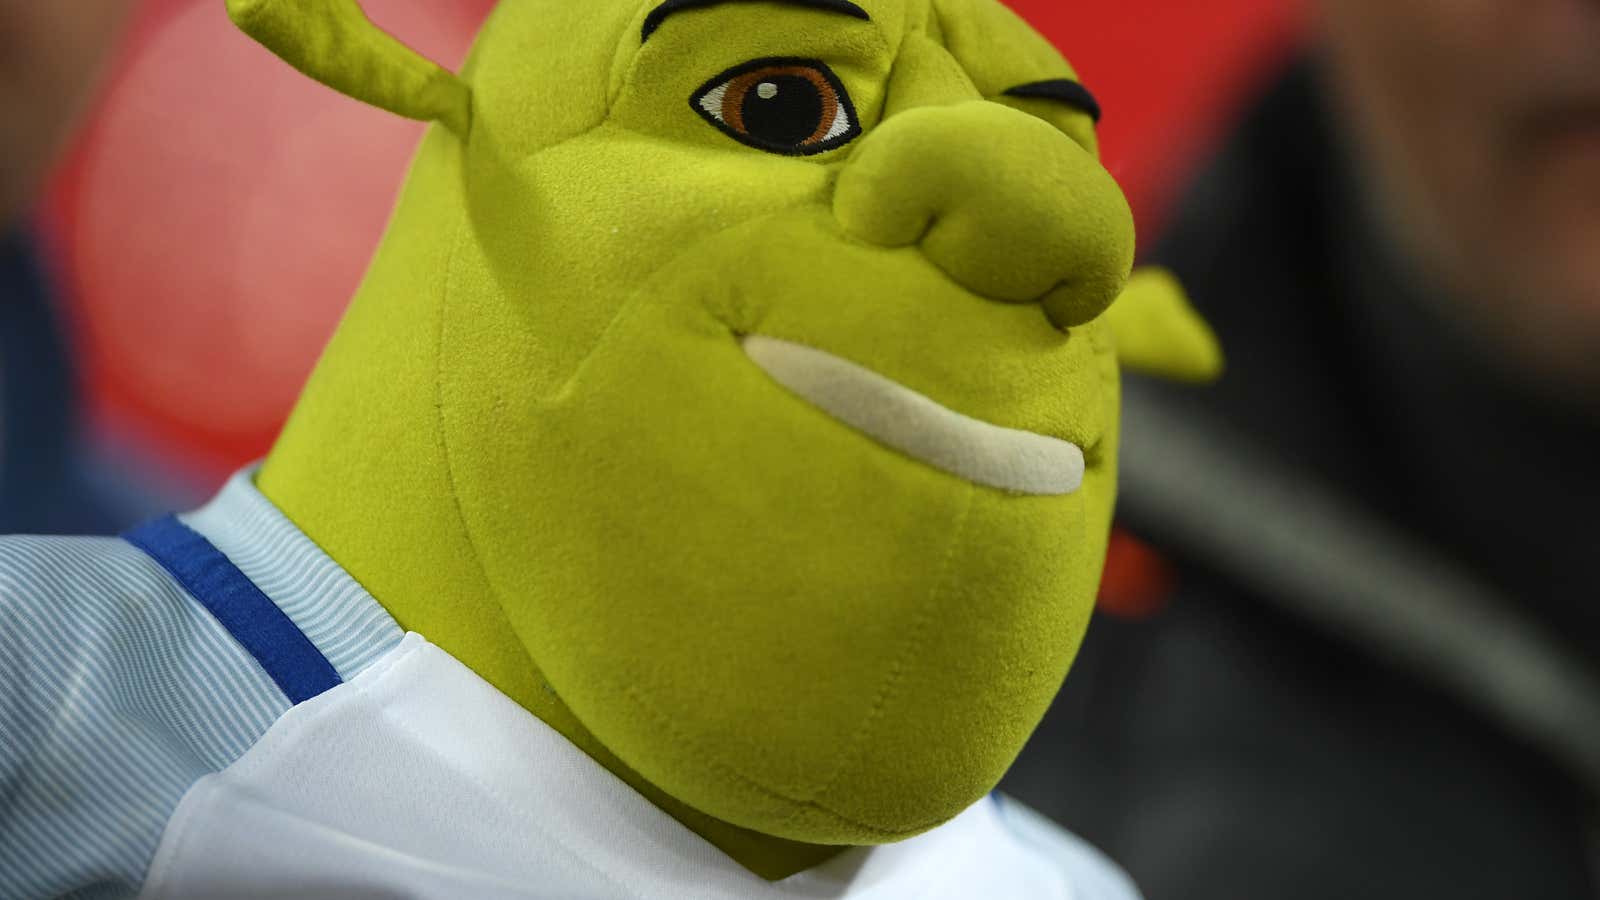 Now streaming on Twitter: a pirated version of Shrek the Third